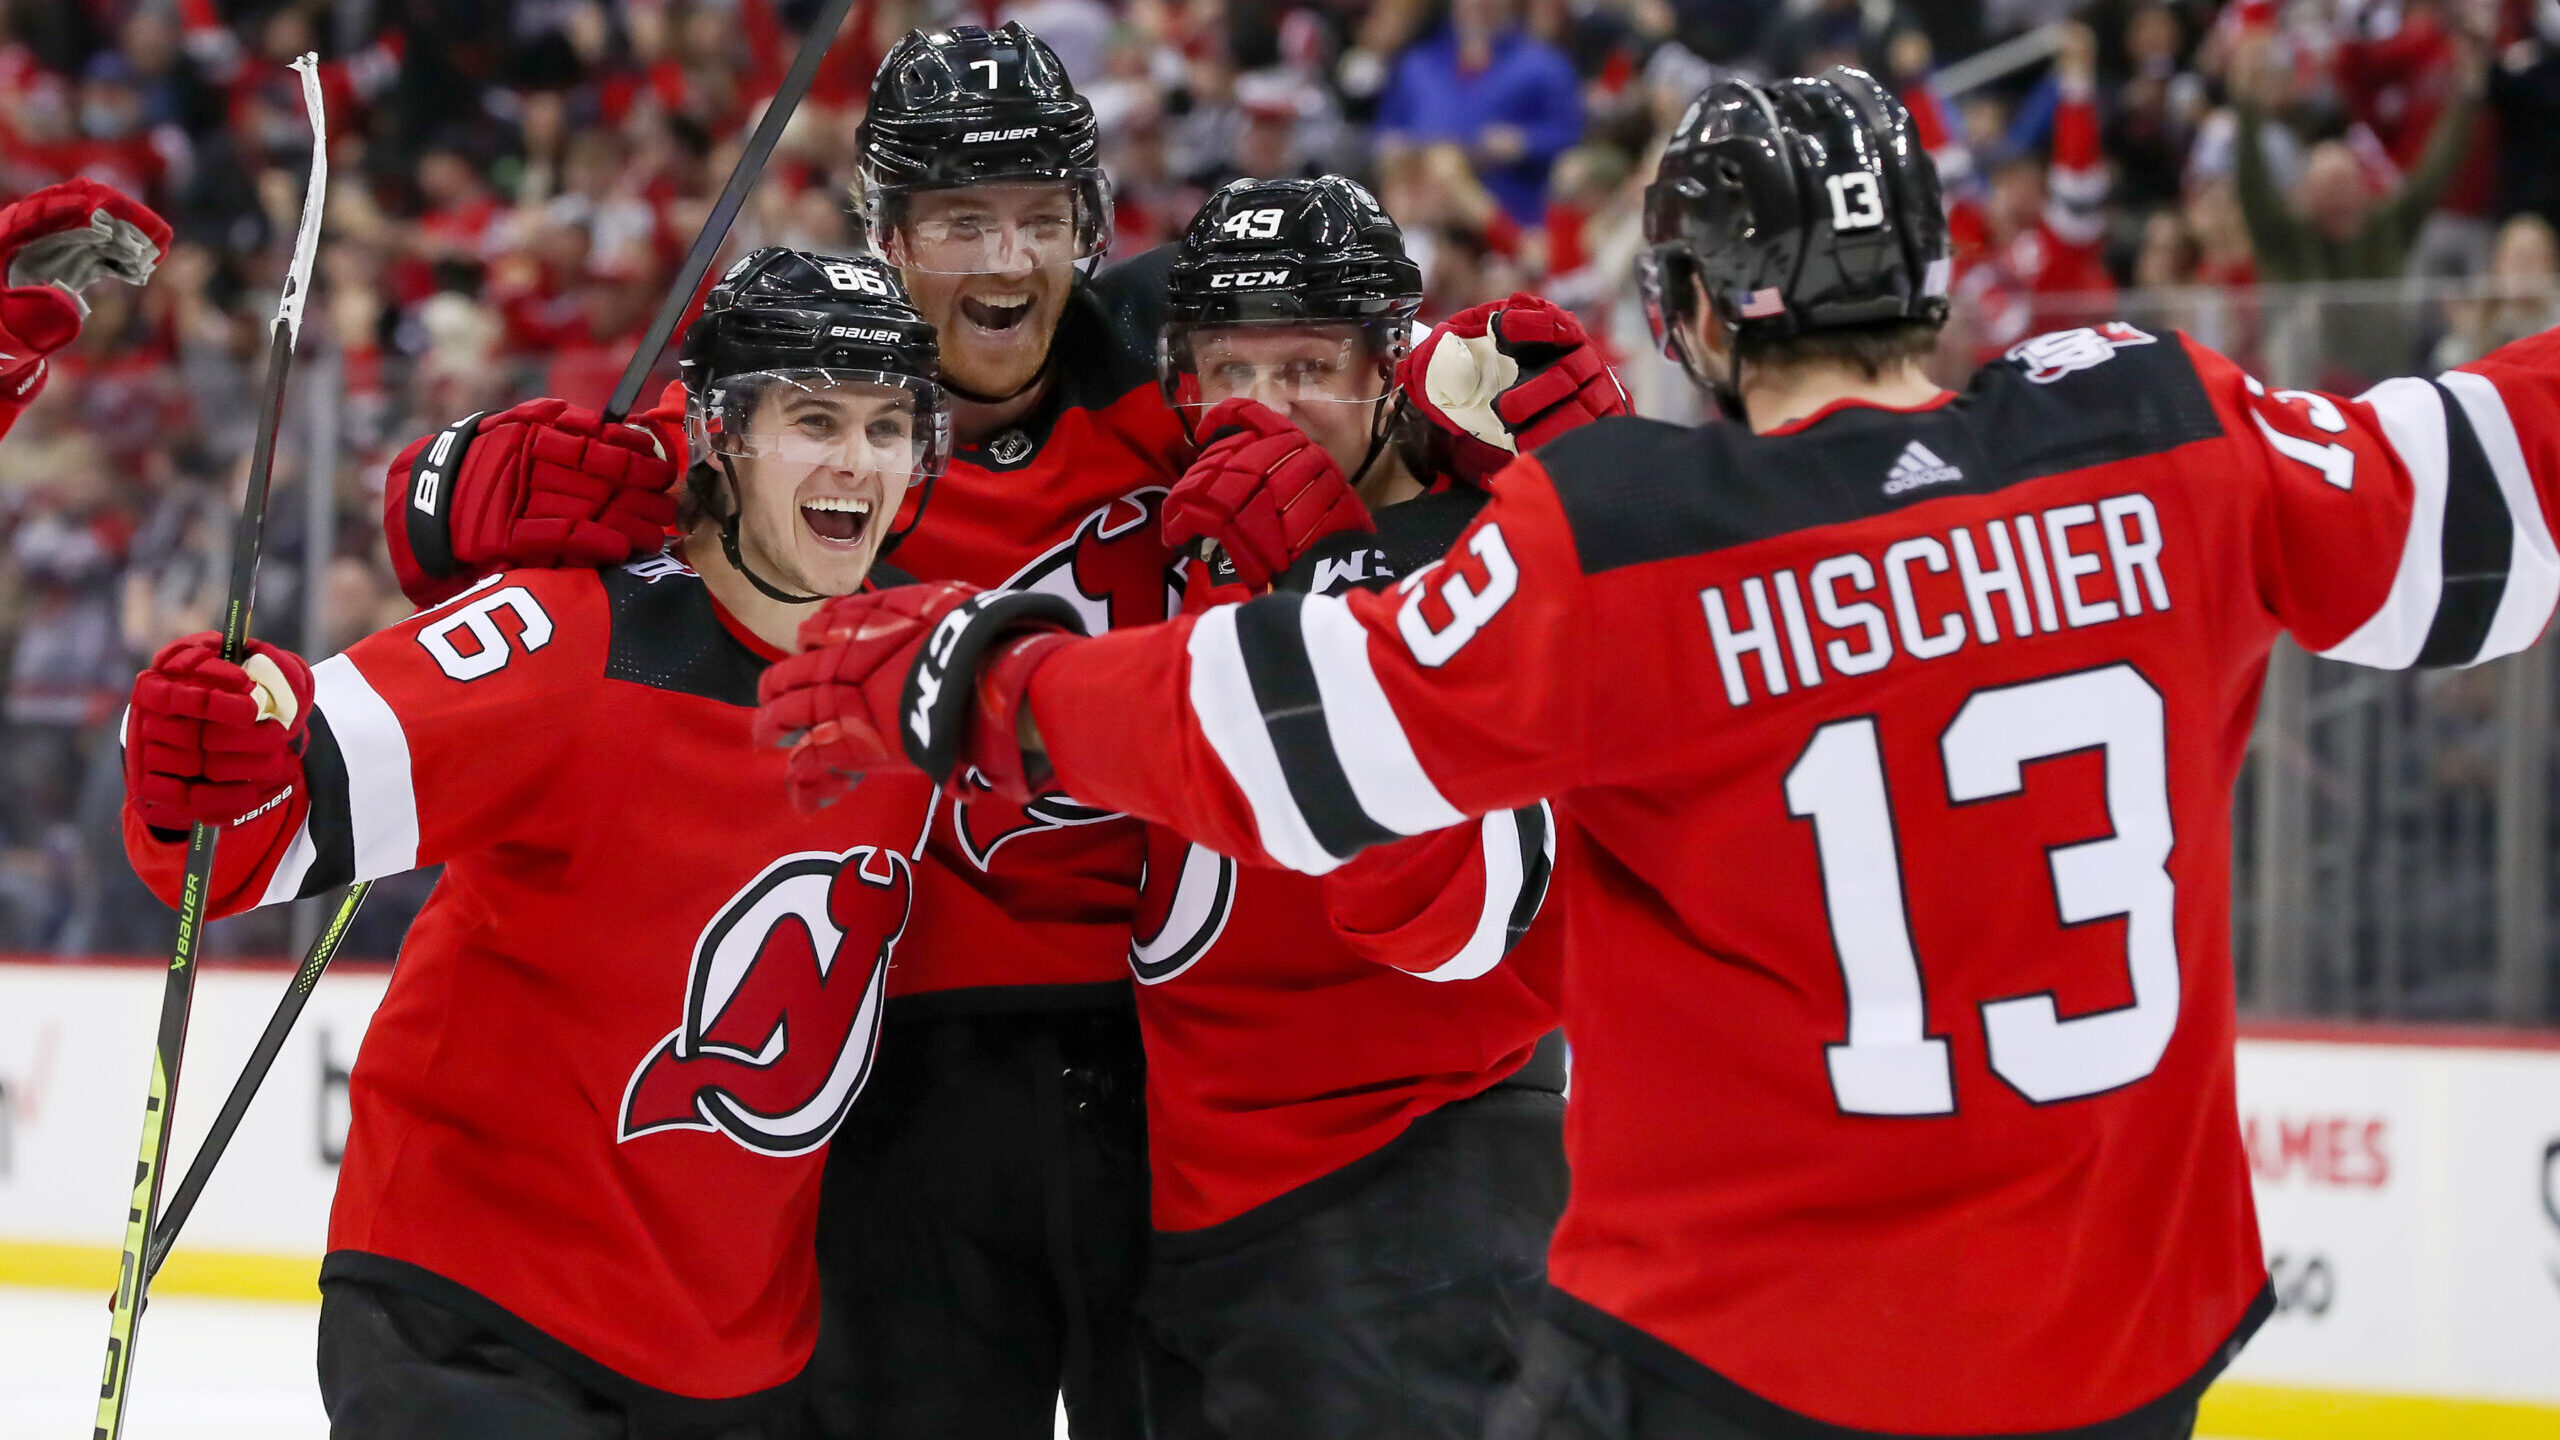 New Jersey Devils vs. Pittsburgh Penguins: Live Stream, TV Channel, Start  Time  4/4/2023 - How to Watch and Stream Major League & College Sports -  Sports Illustrated.